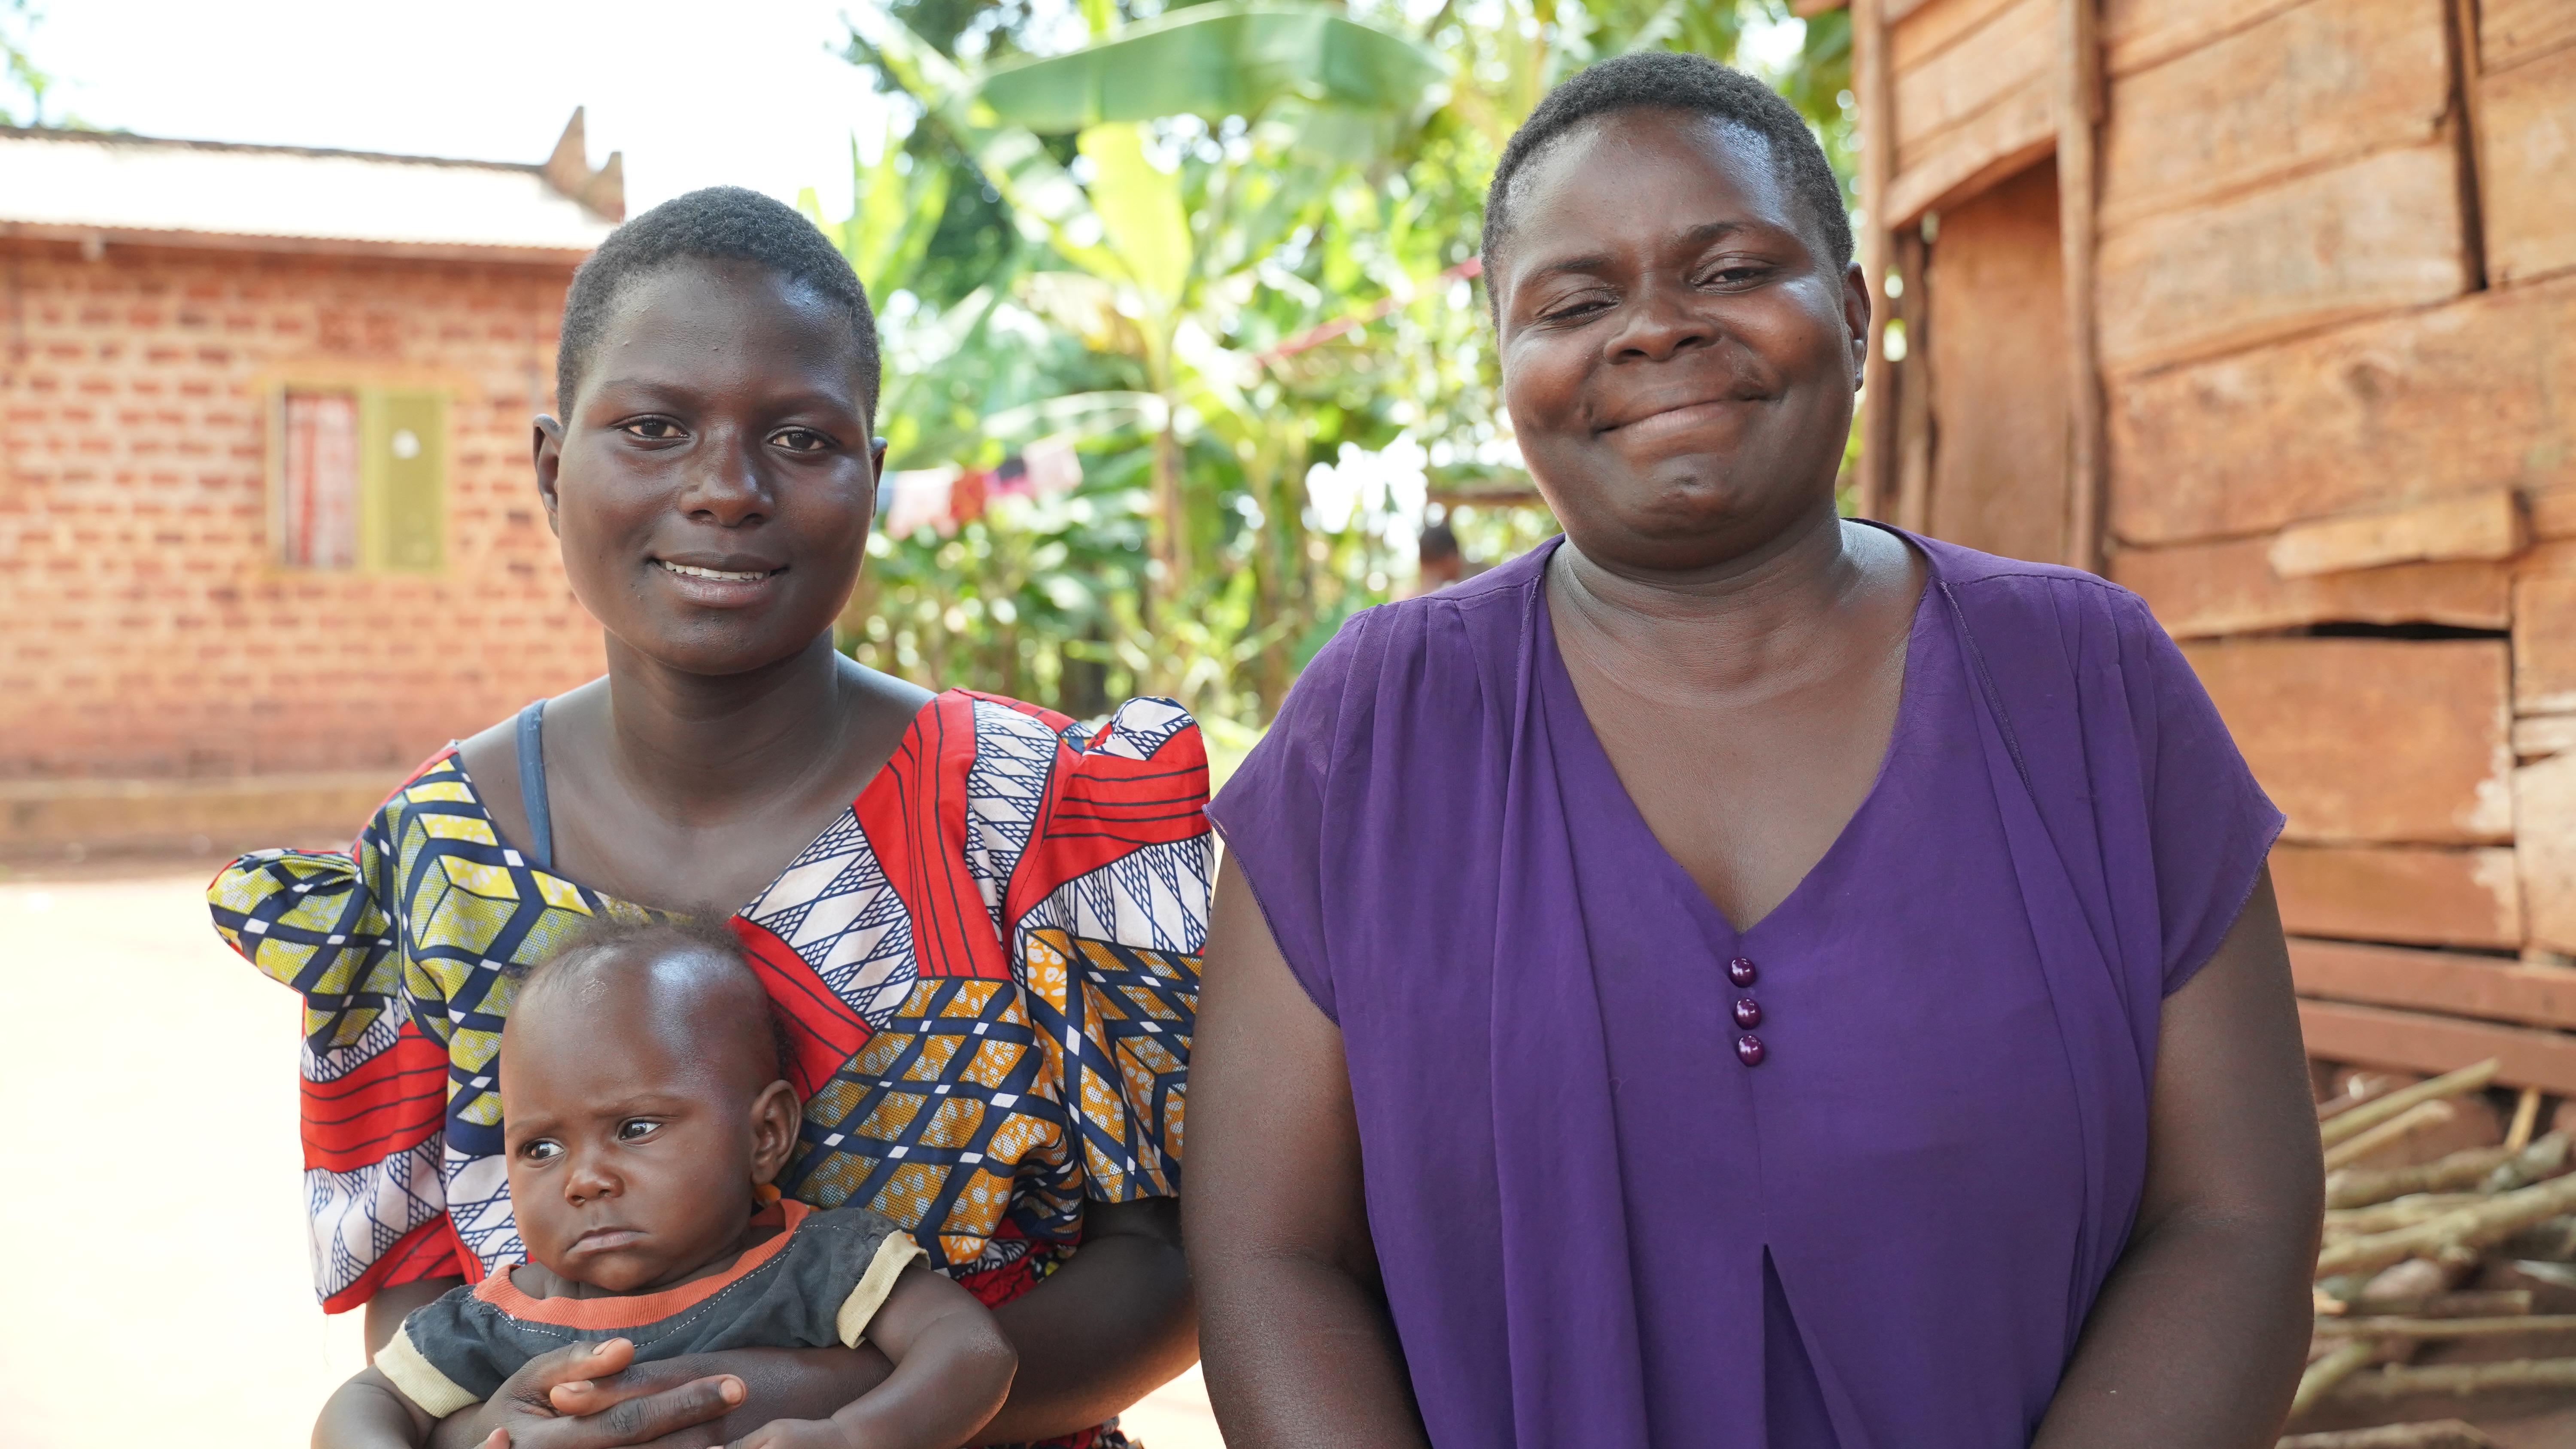 Namuswe Sylvia, 15, with her one-year-old son, and her mother, 29. Photo: Caspar Haarløv